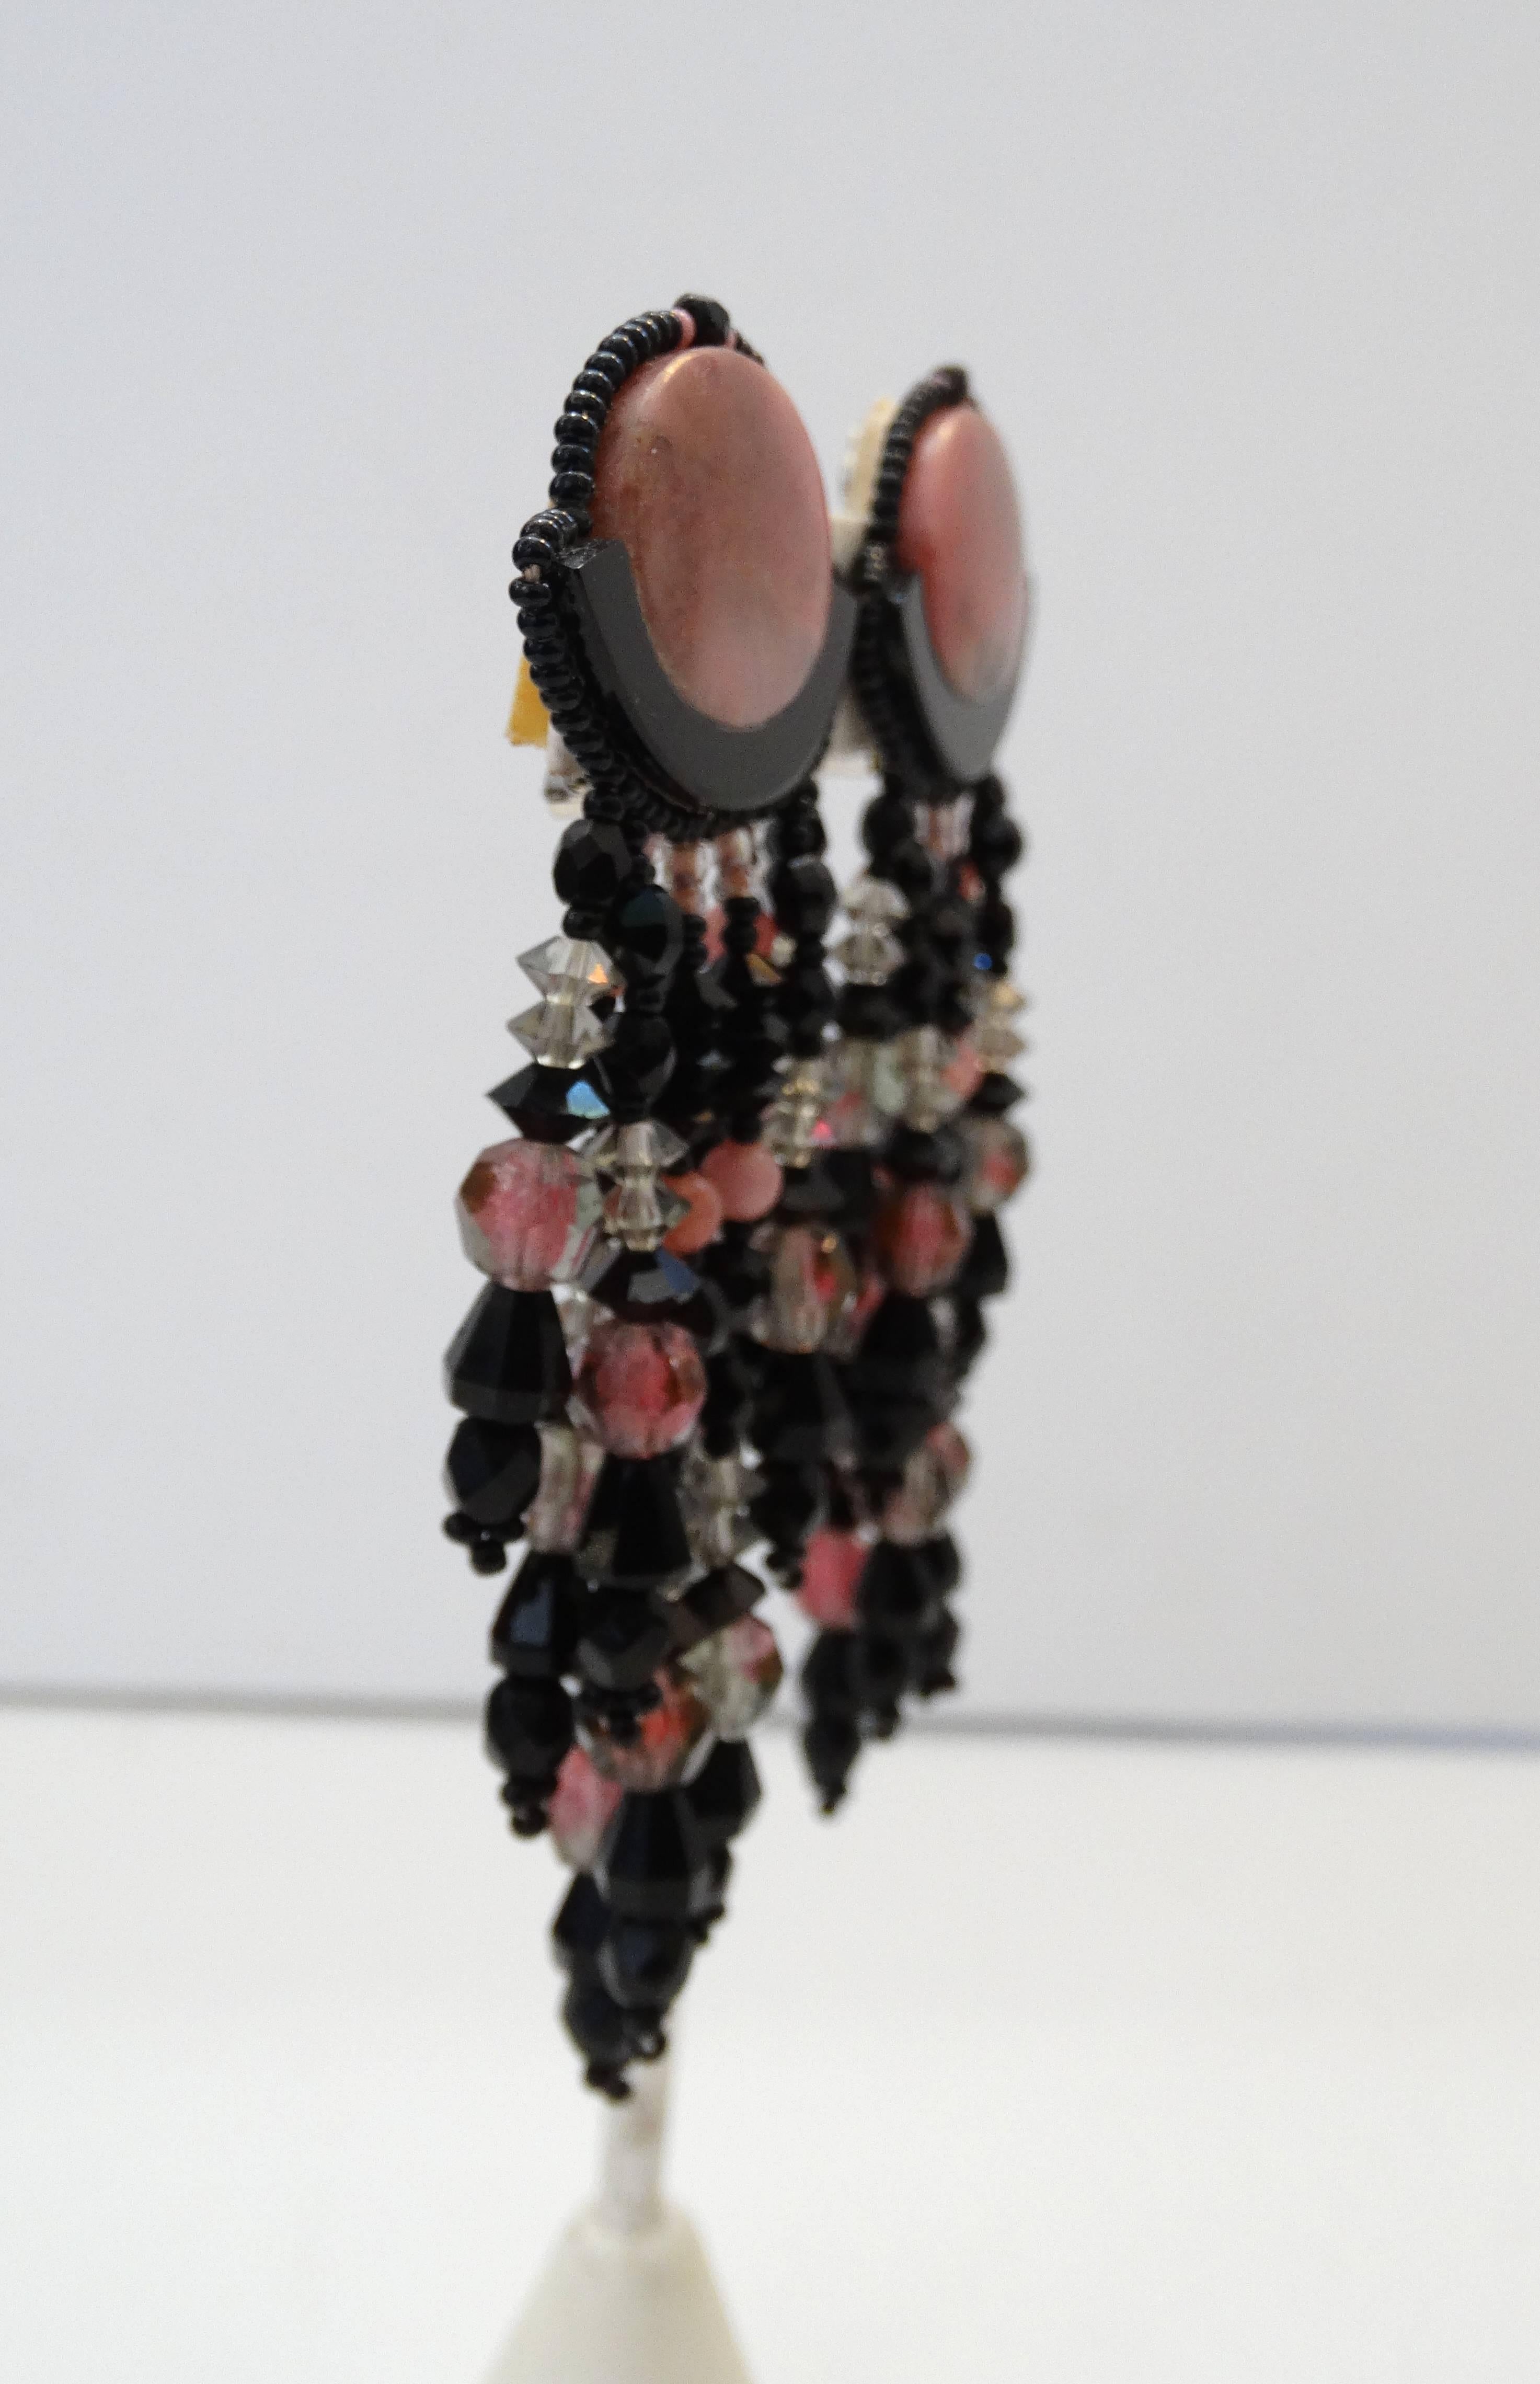 Rock a statement earring with our incredible beaded dangle earrings from the 1980s! Center charm made of a marbled pink stone and trimmed with stitched on black and pink beads. Strands of pink, clear and black beads suspended from the center charm.